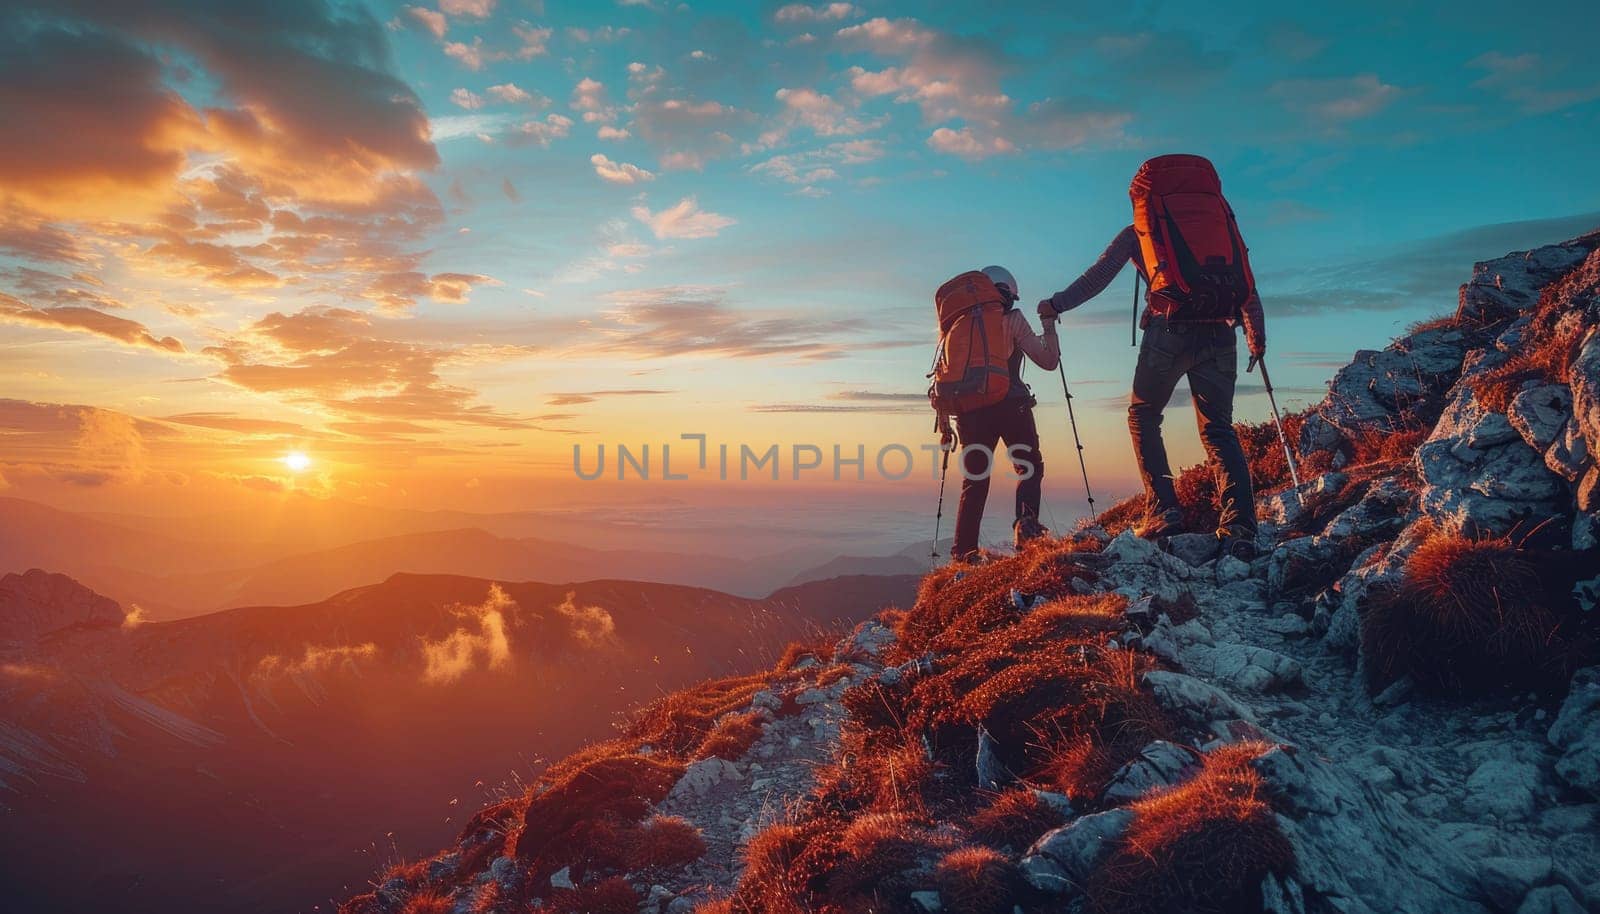 Two people are hiking up a mountain, one of them wearing a blue backpack by AI generated image.